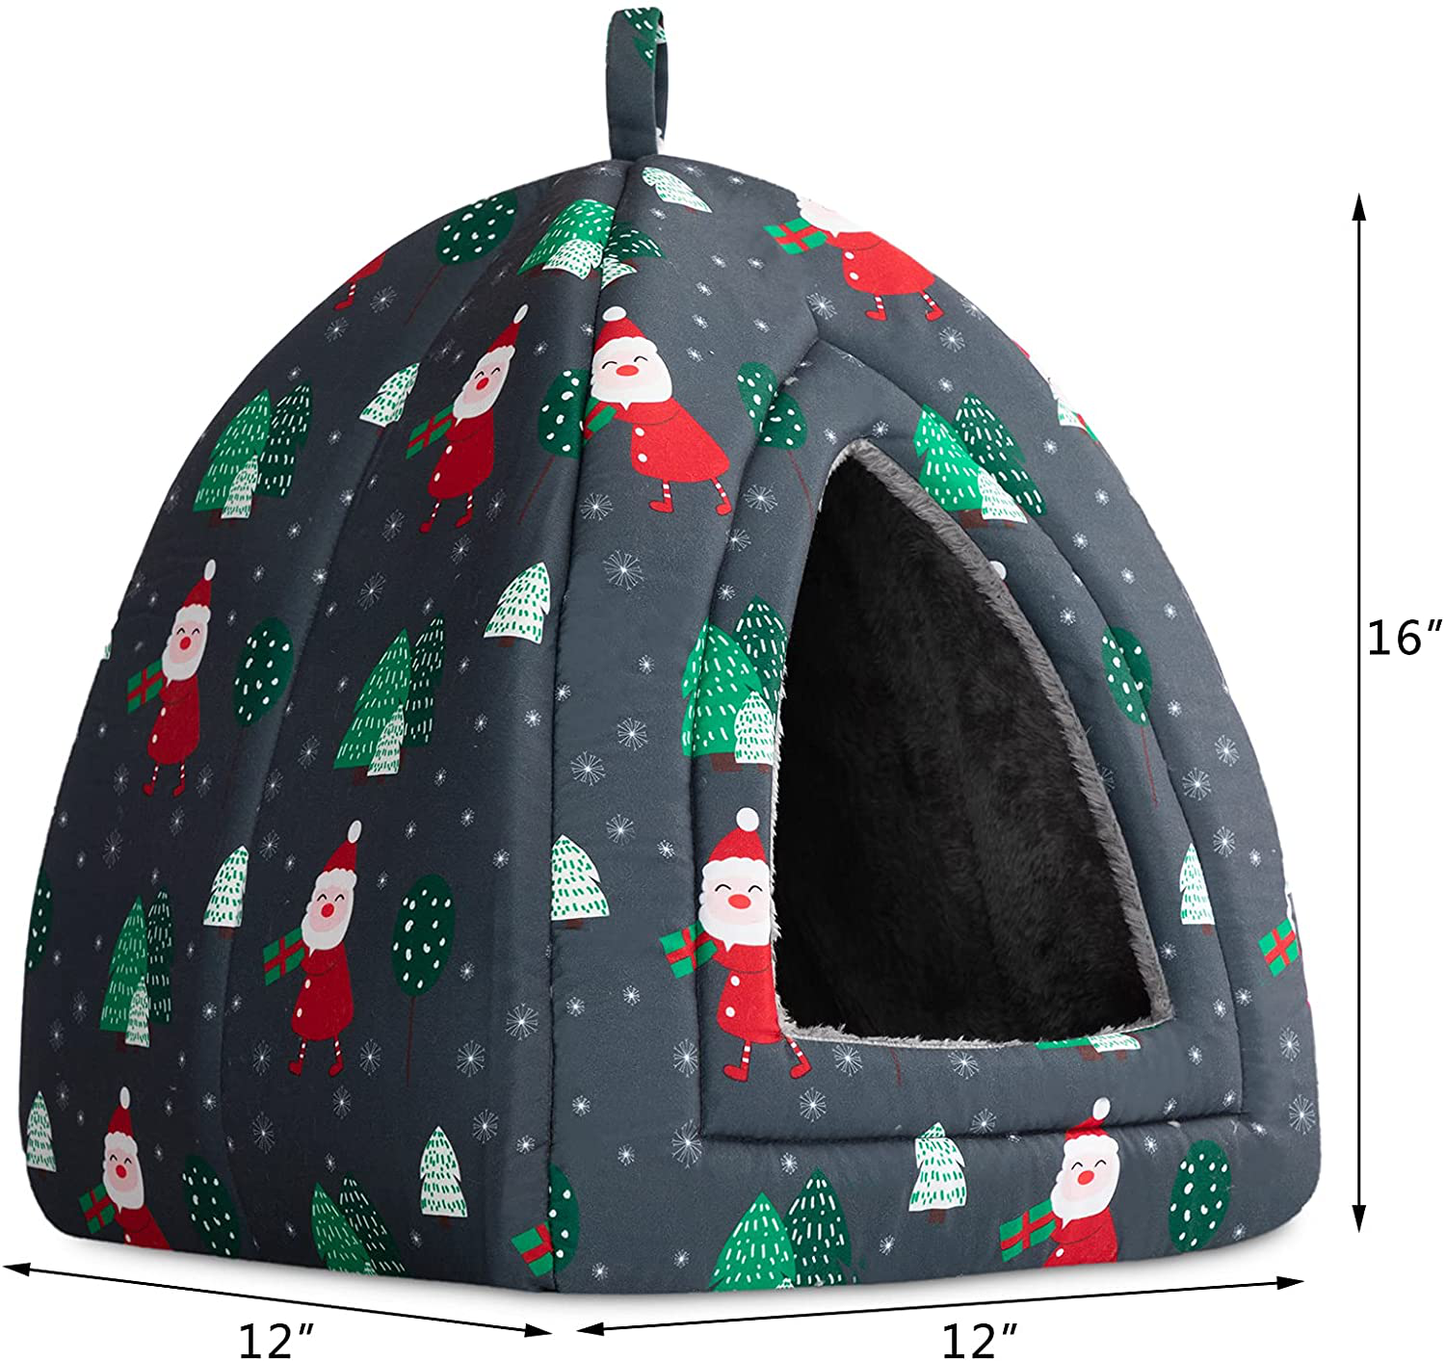 Hollypet Self-Warming 2 in 1 Foldable Comfortable Triangle Cat Bed Tent House Christmas Pet Bed